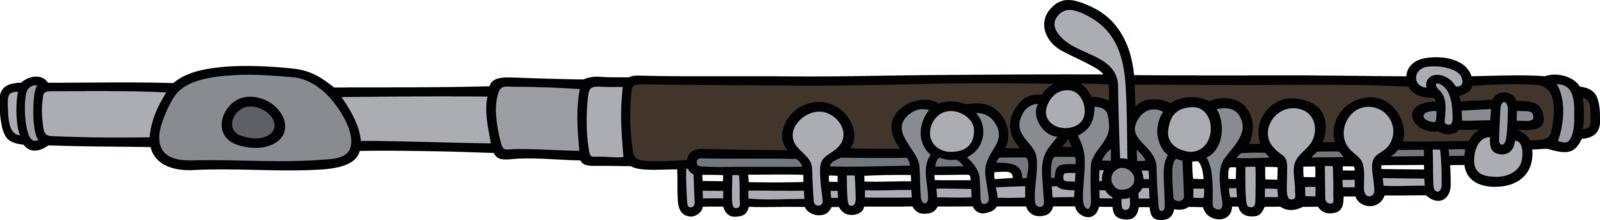 The vectorized hand drawing of a classic steel and  wooden piccolo